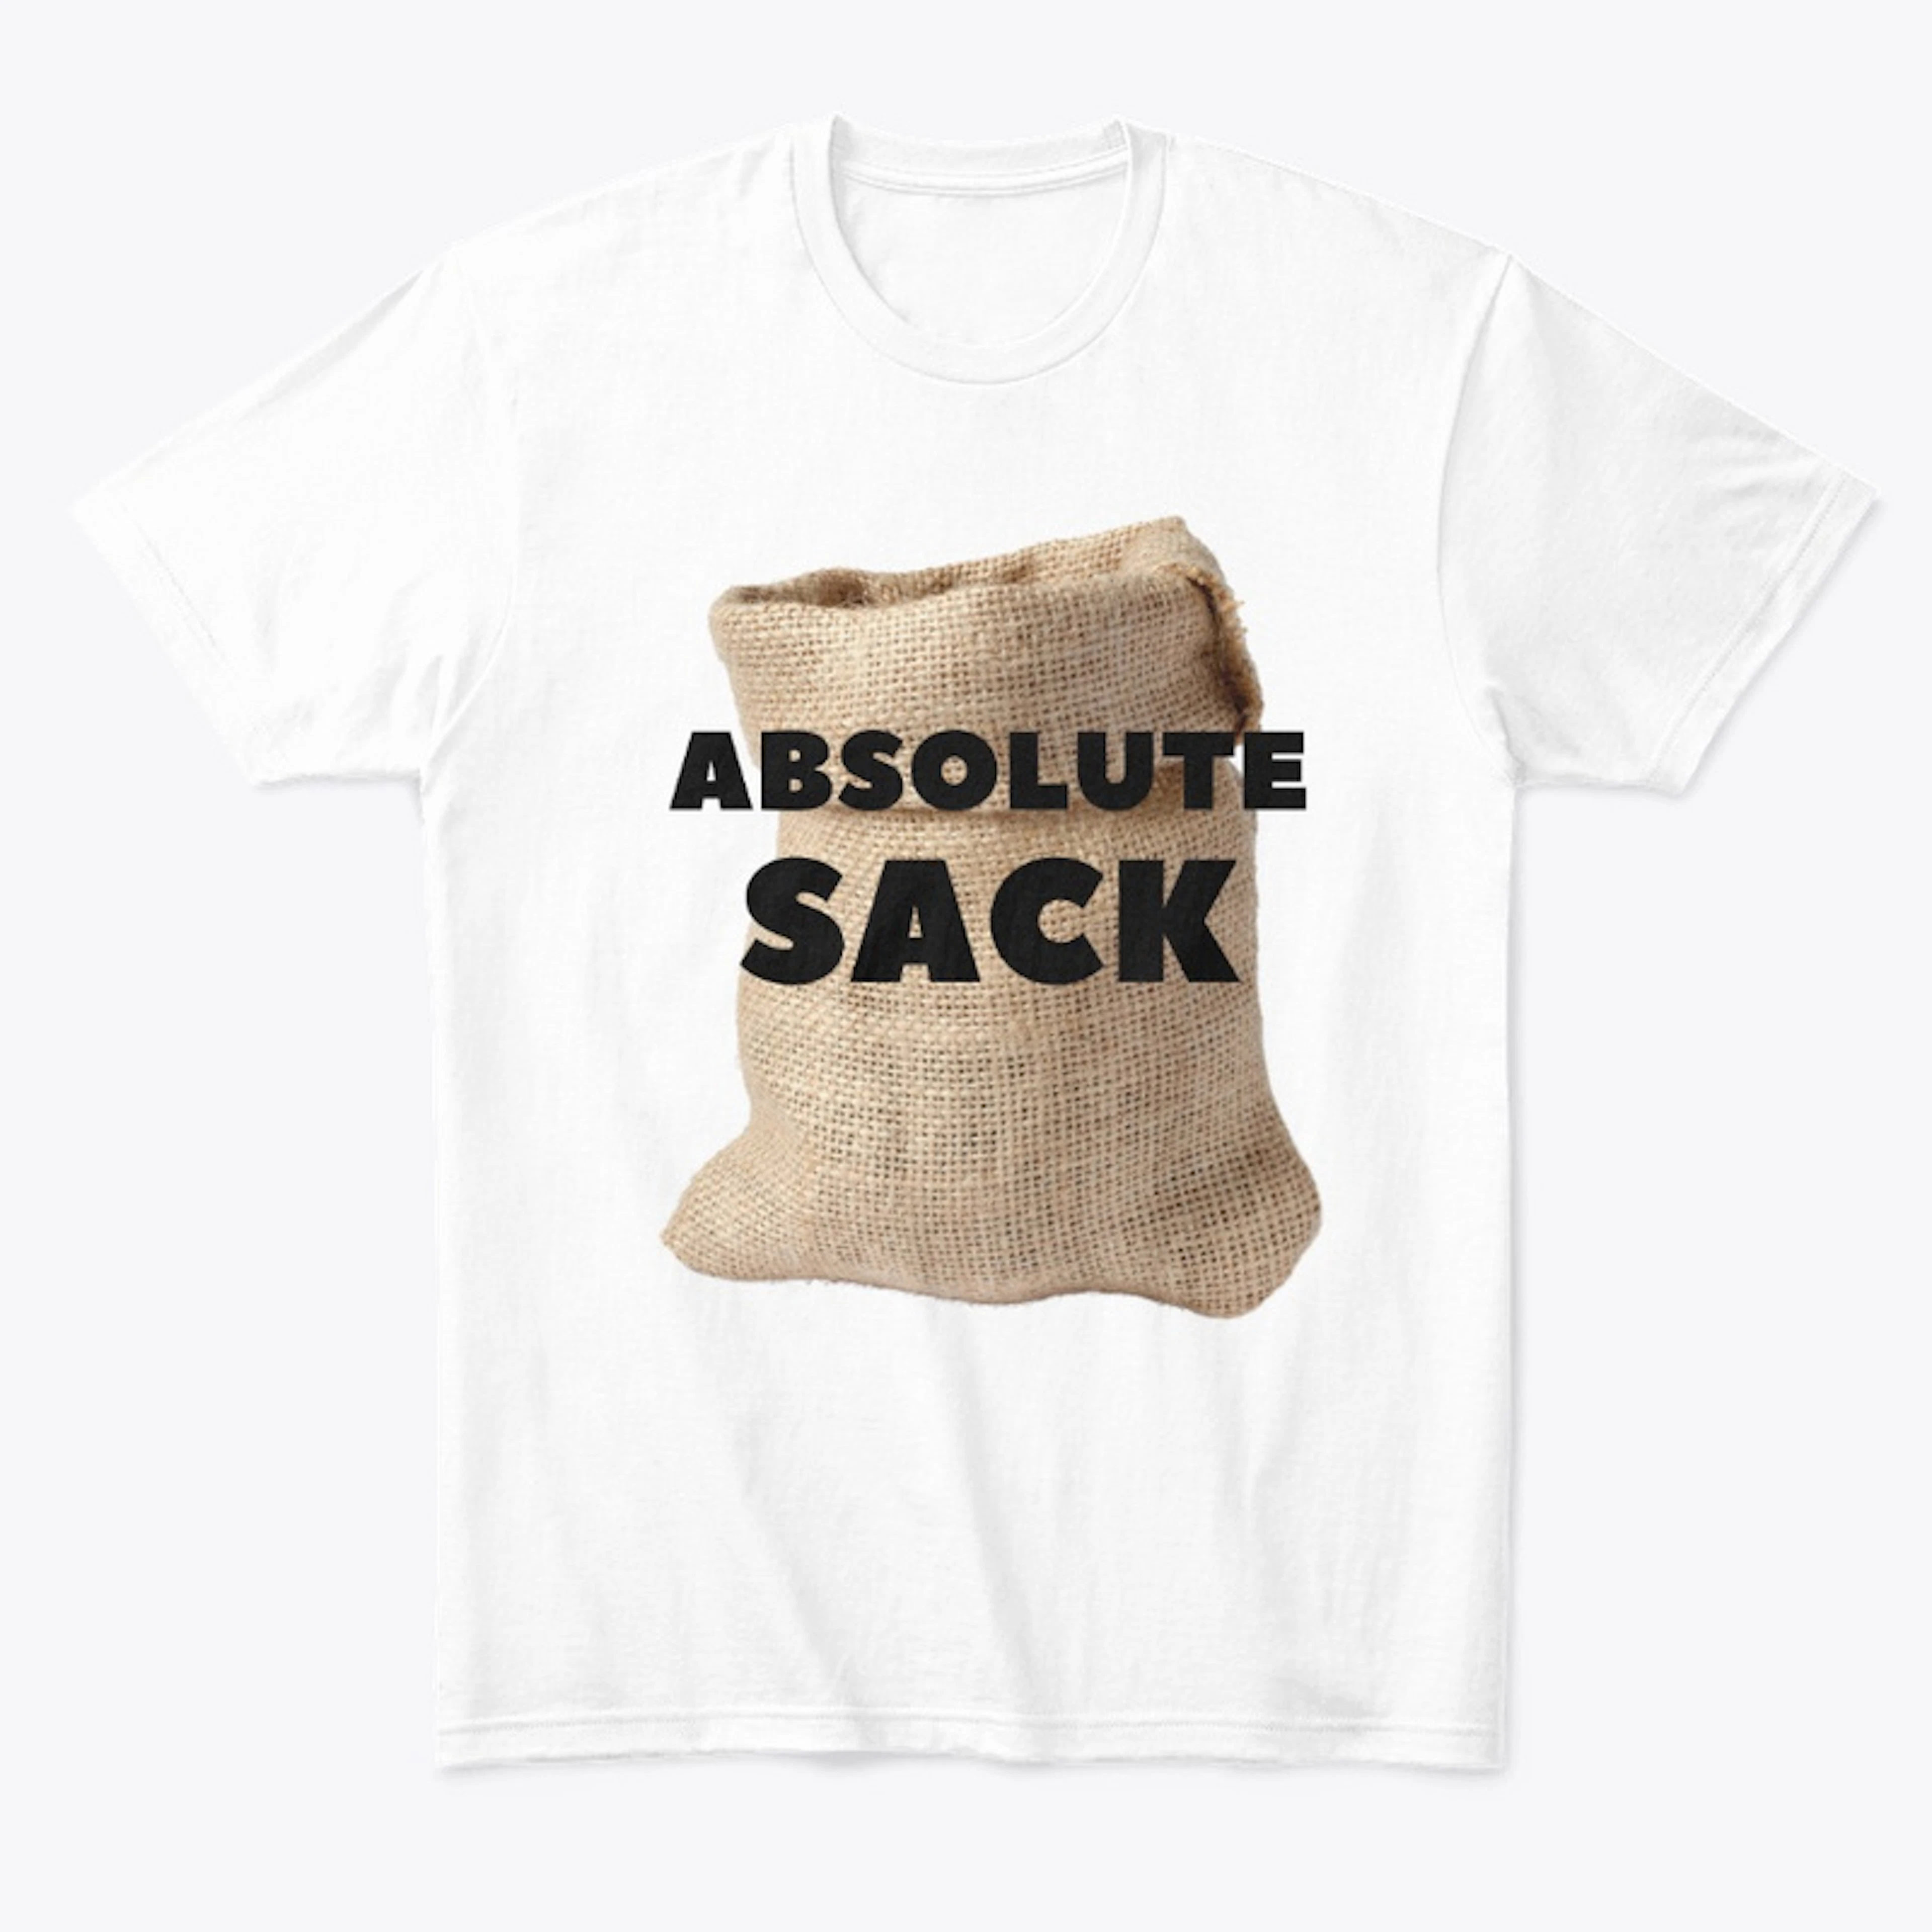 ABSOLUTE SACK